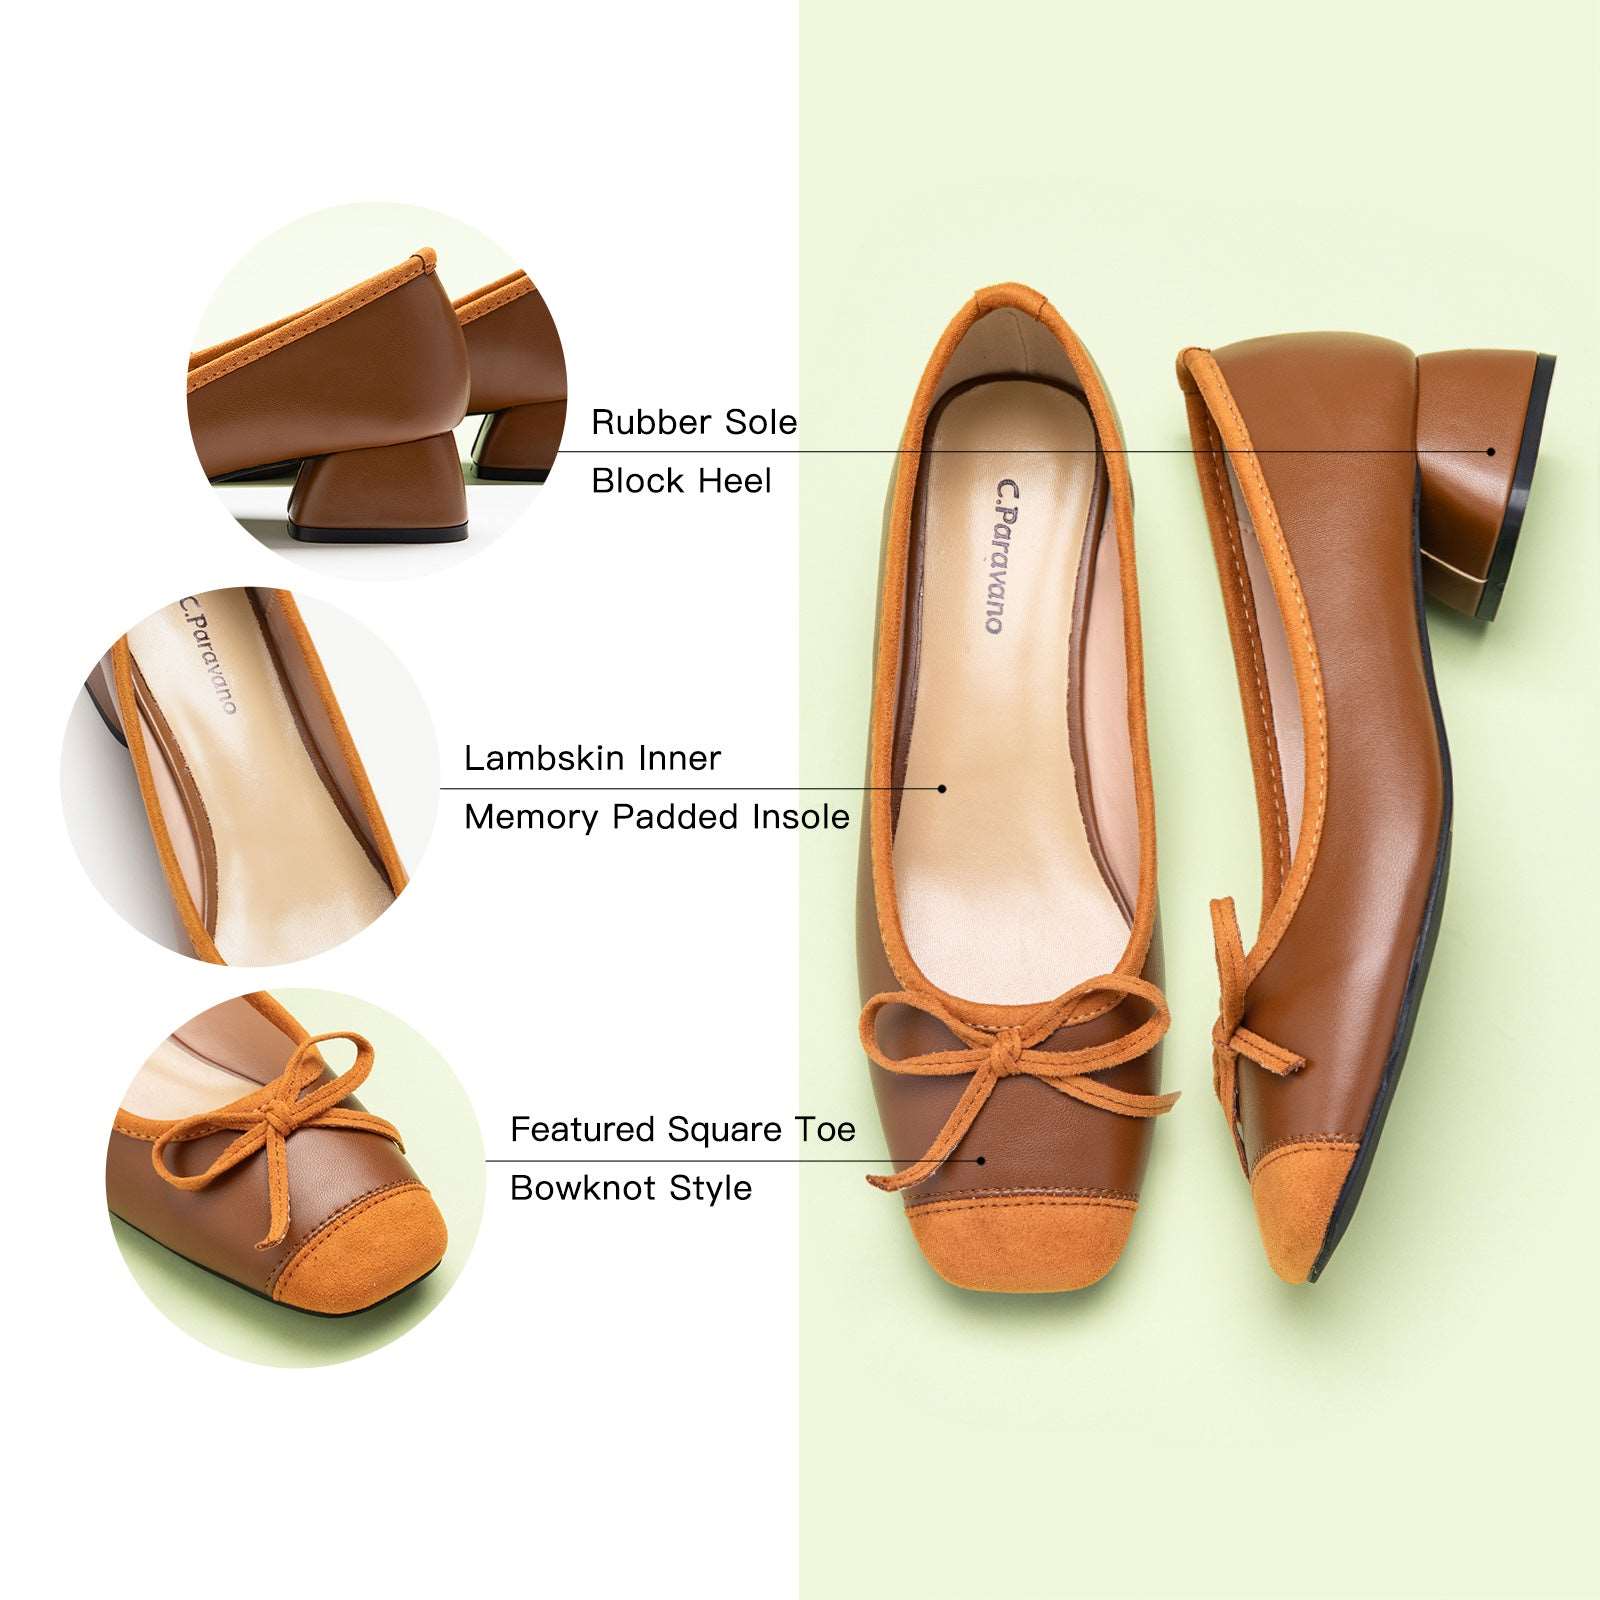 Step into timeless elegance with these brown low heels featuring a chic bowknot, perfect for a polished and refined look.